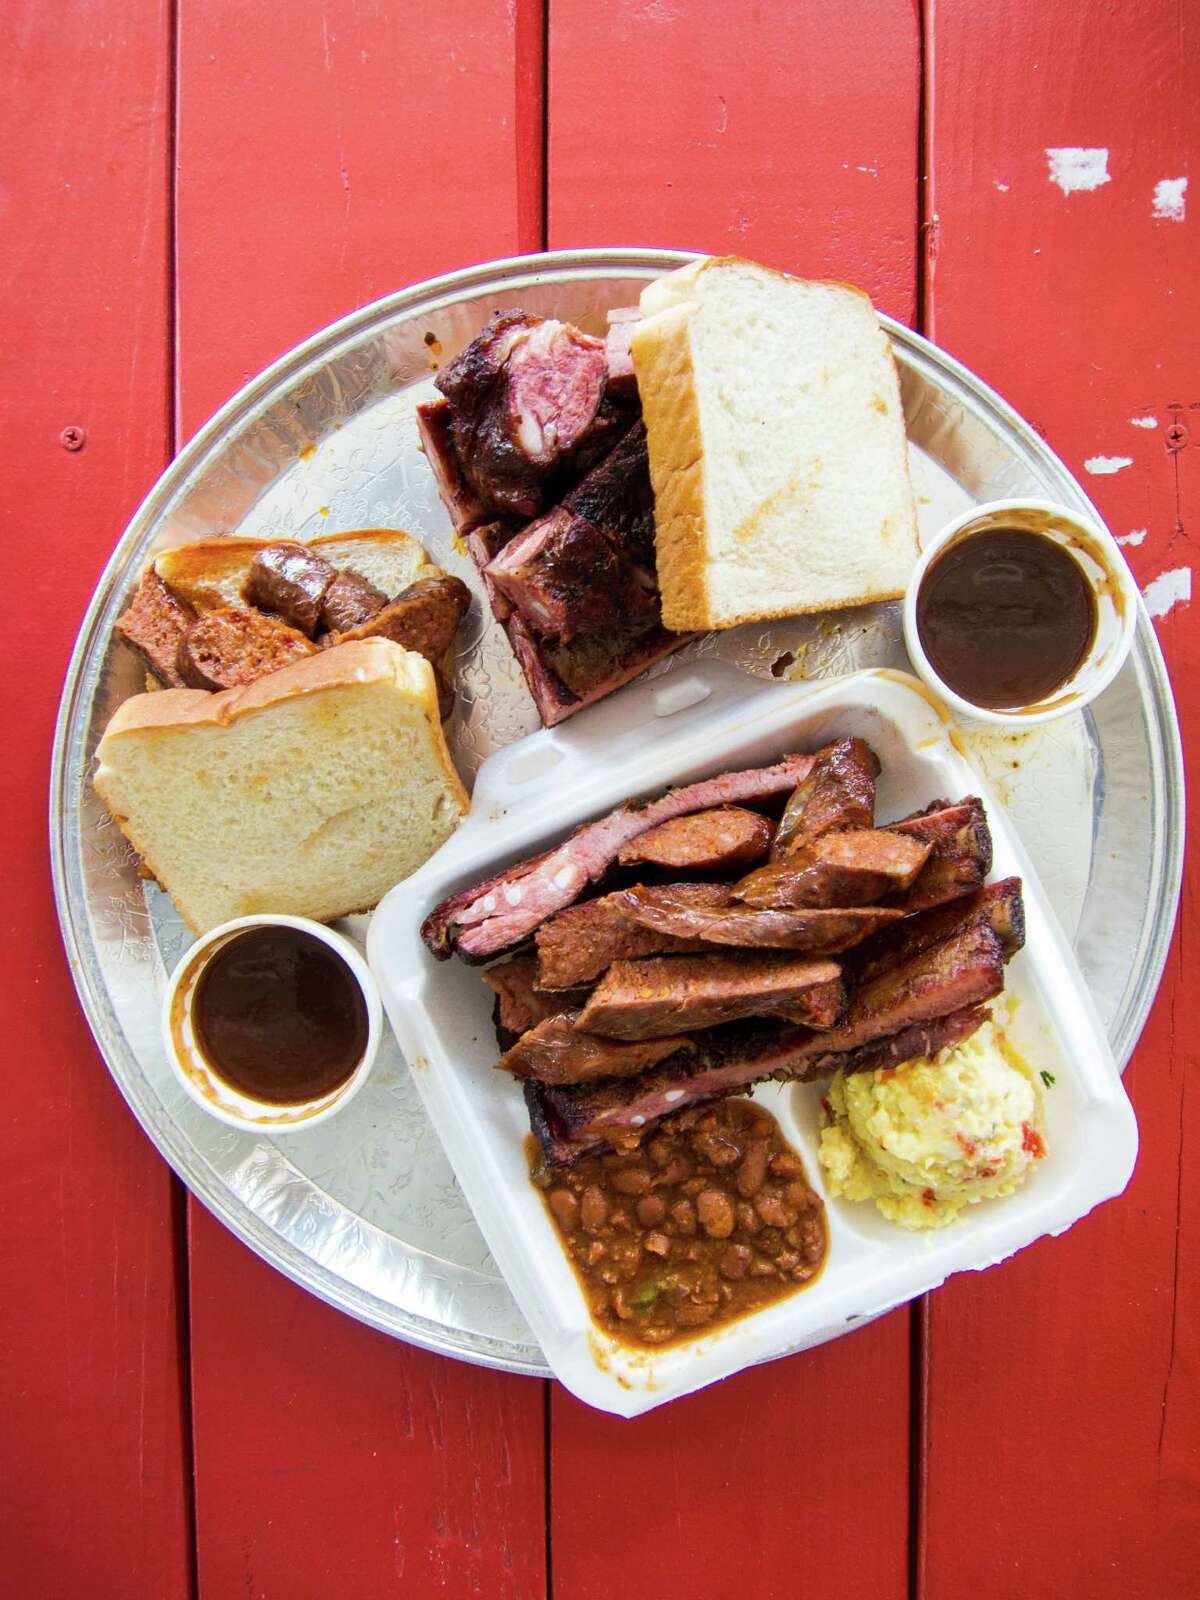 Links and ribs plate and sandwiches at Burns Original BBQ. Burns Original BBQ